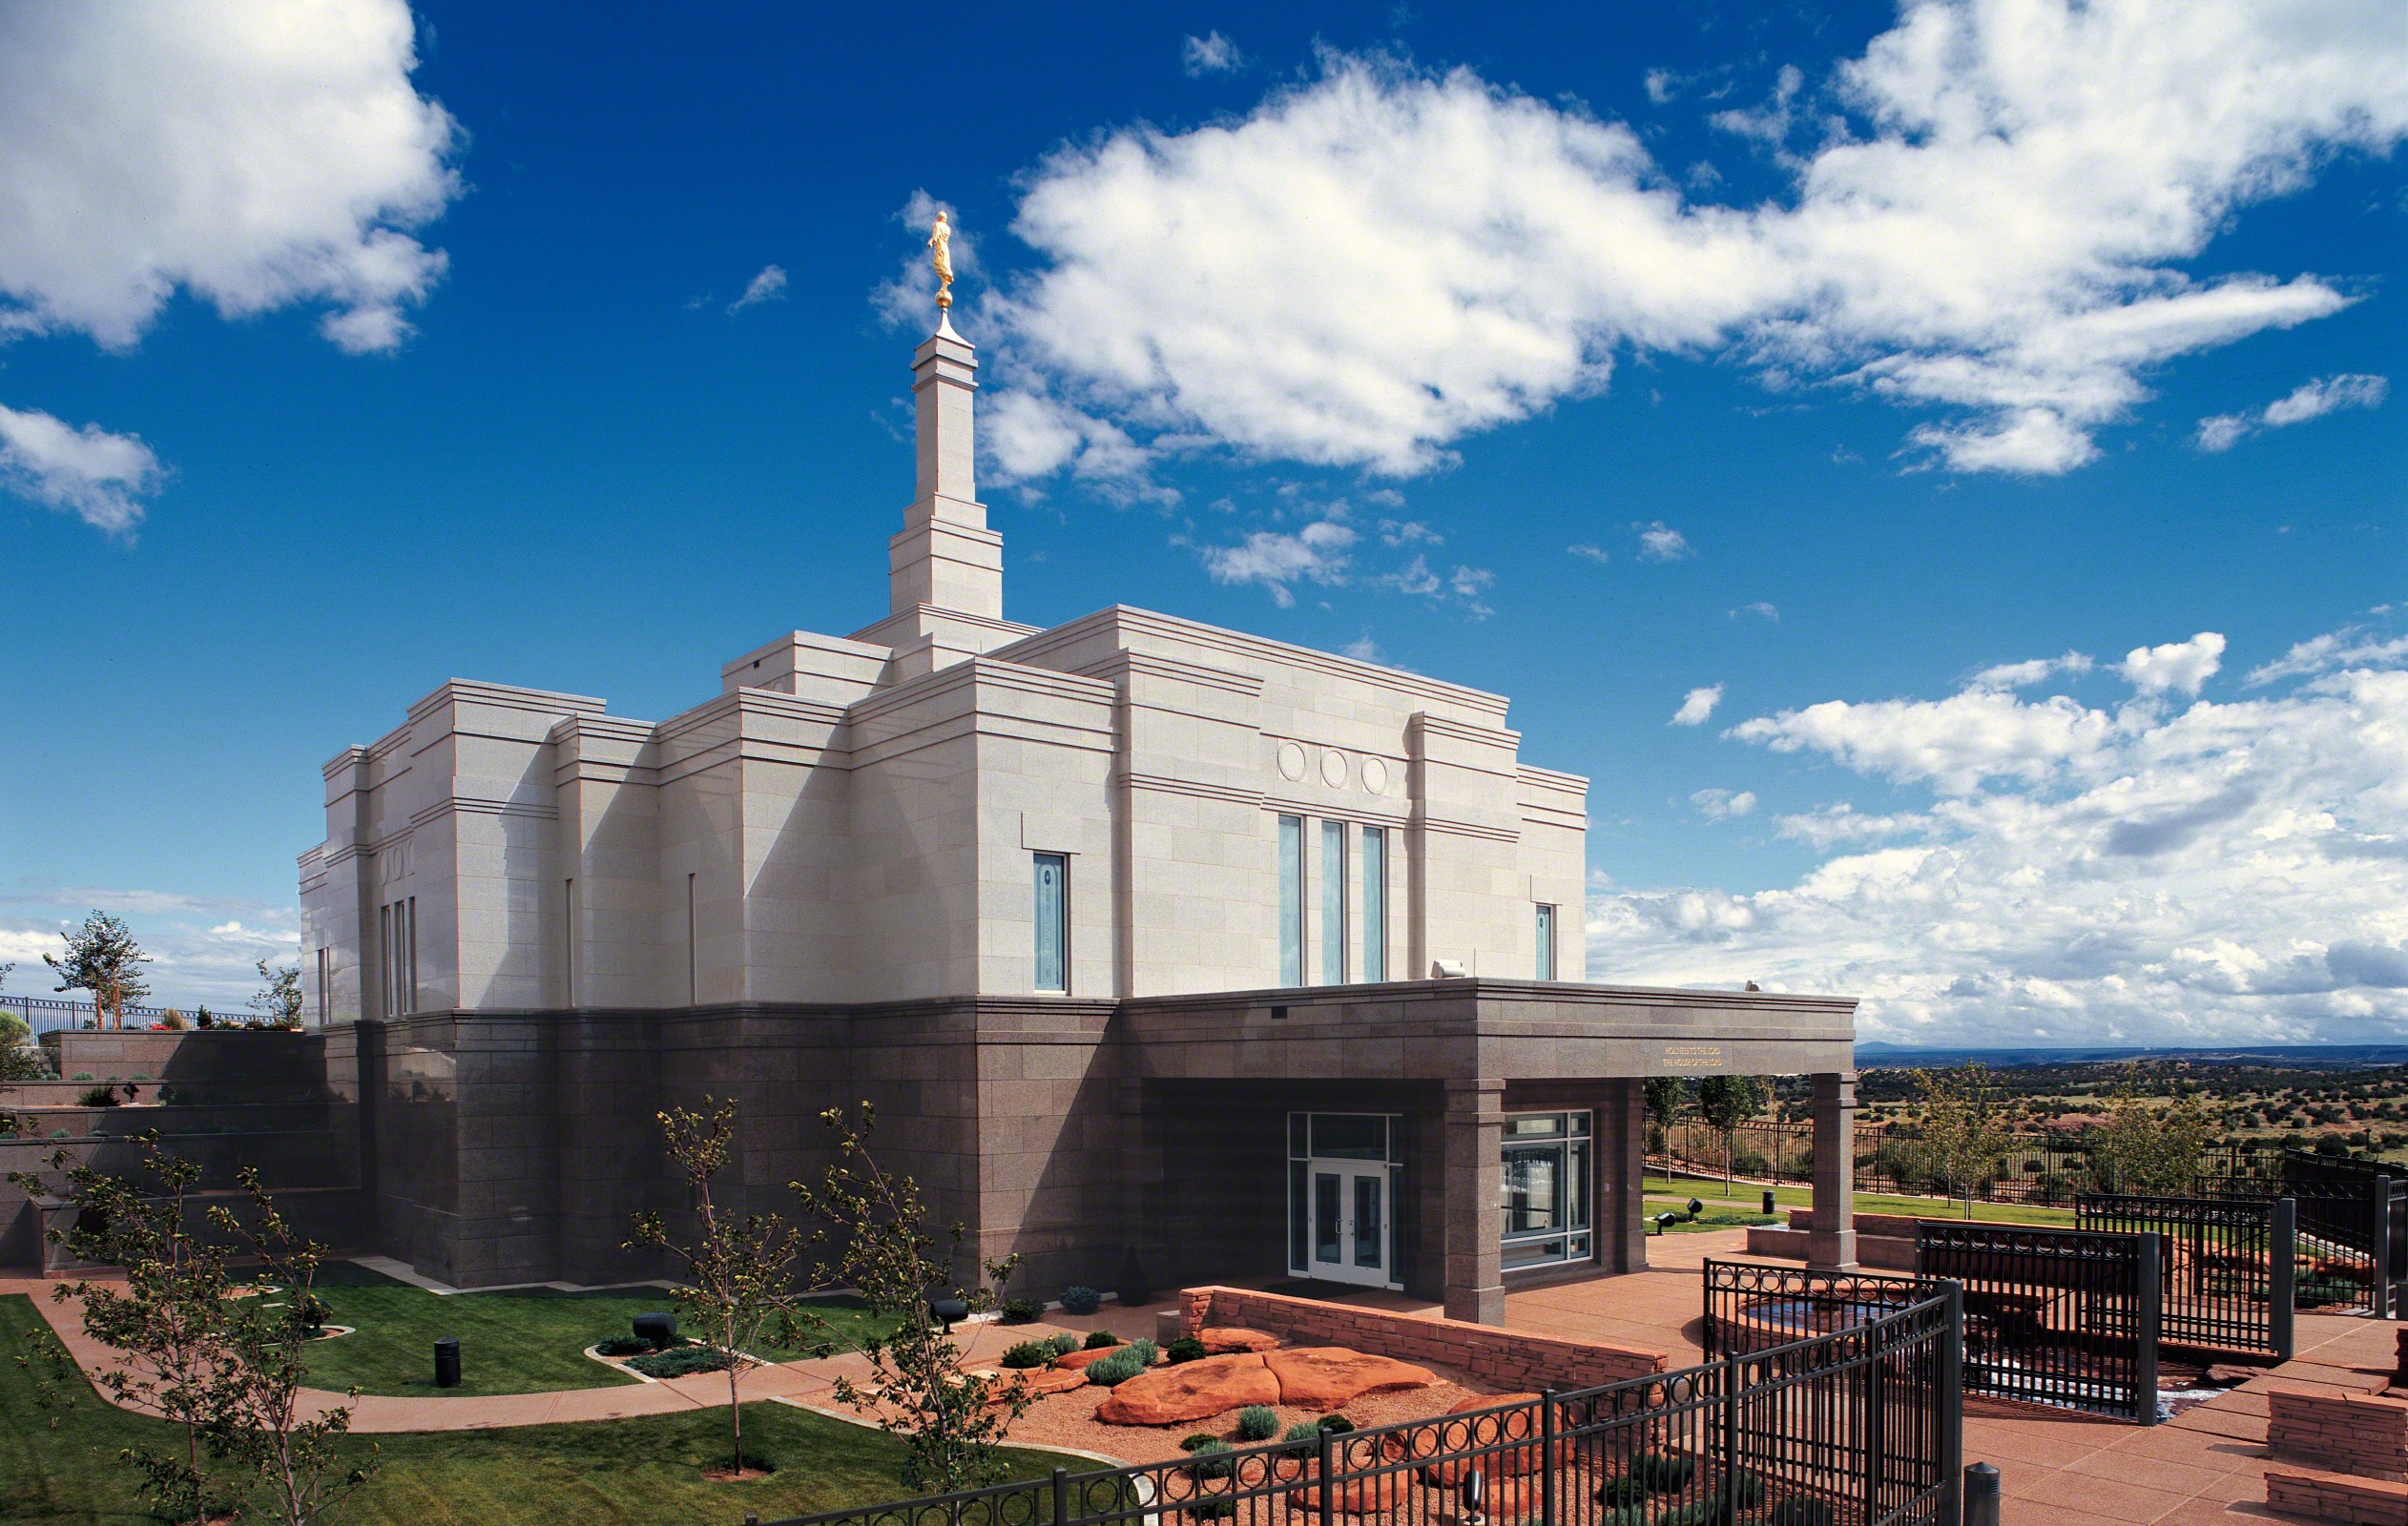 The Church of Jesus Christ of Latter-Day Saints Family History Center | 3550 W 18th Ave, Eugene, OR, 97402 | +1 (541) 343-3741